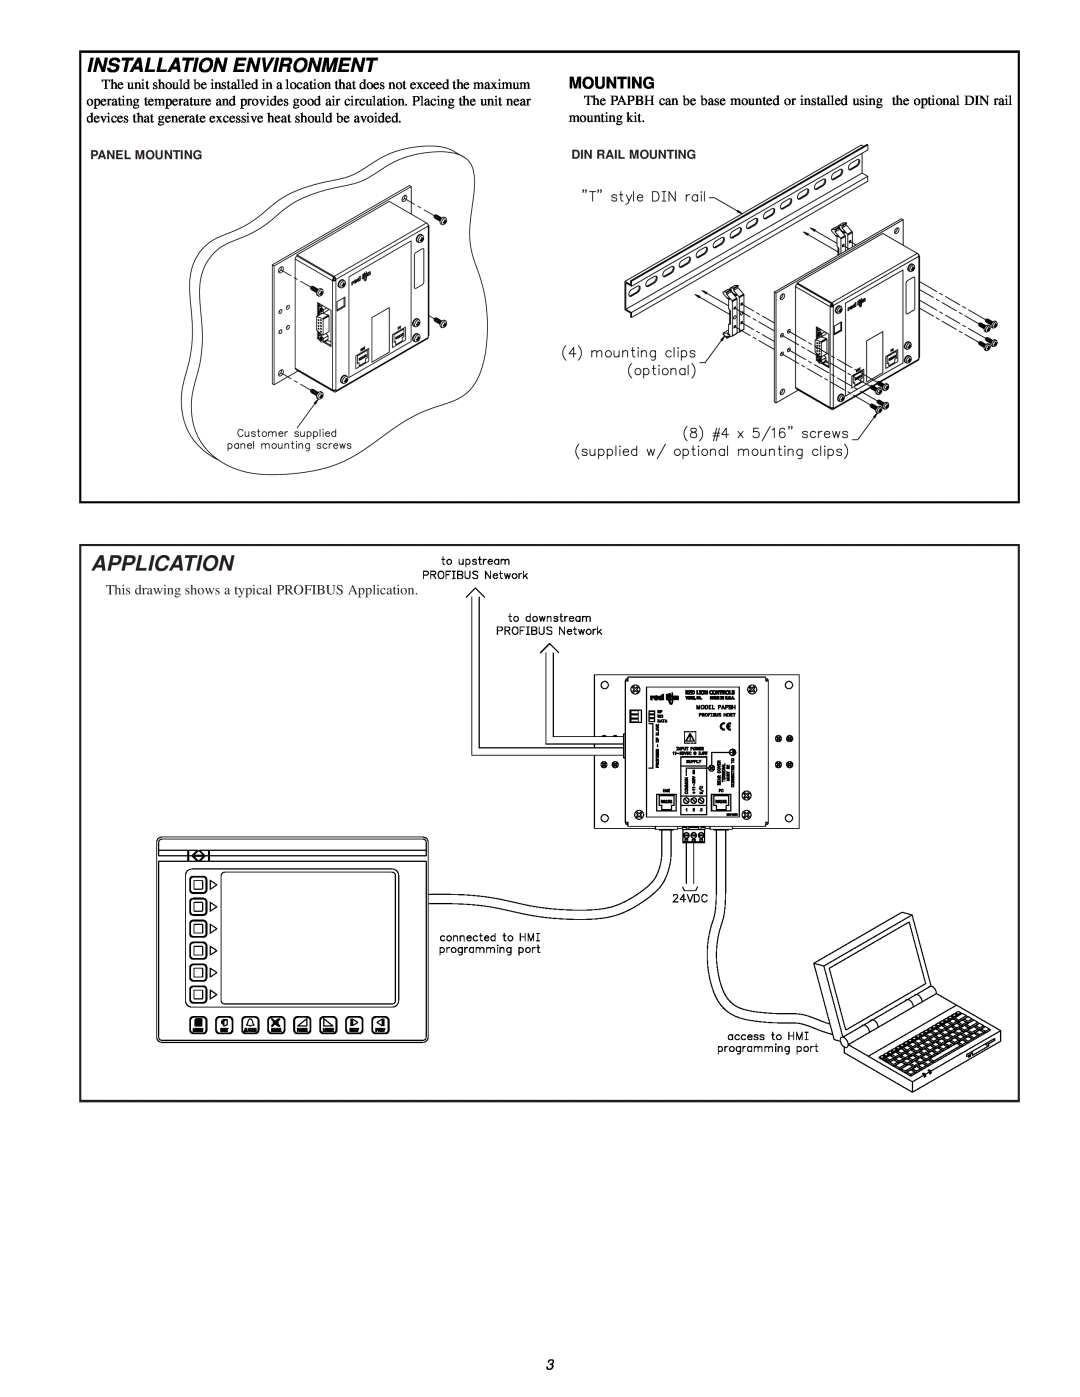 Siemens PAPBH dimensions Application, Installation Environment, Mounting 